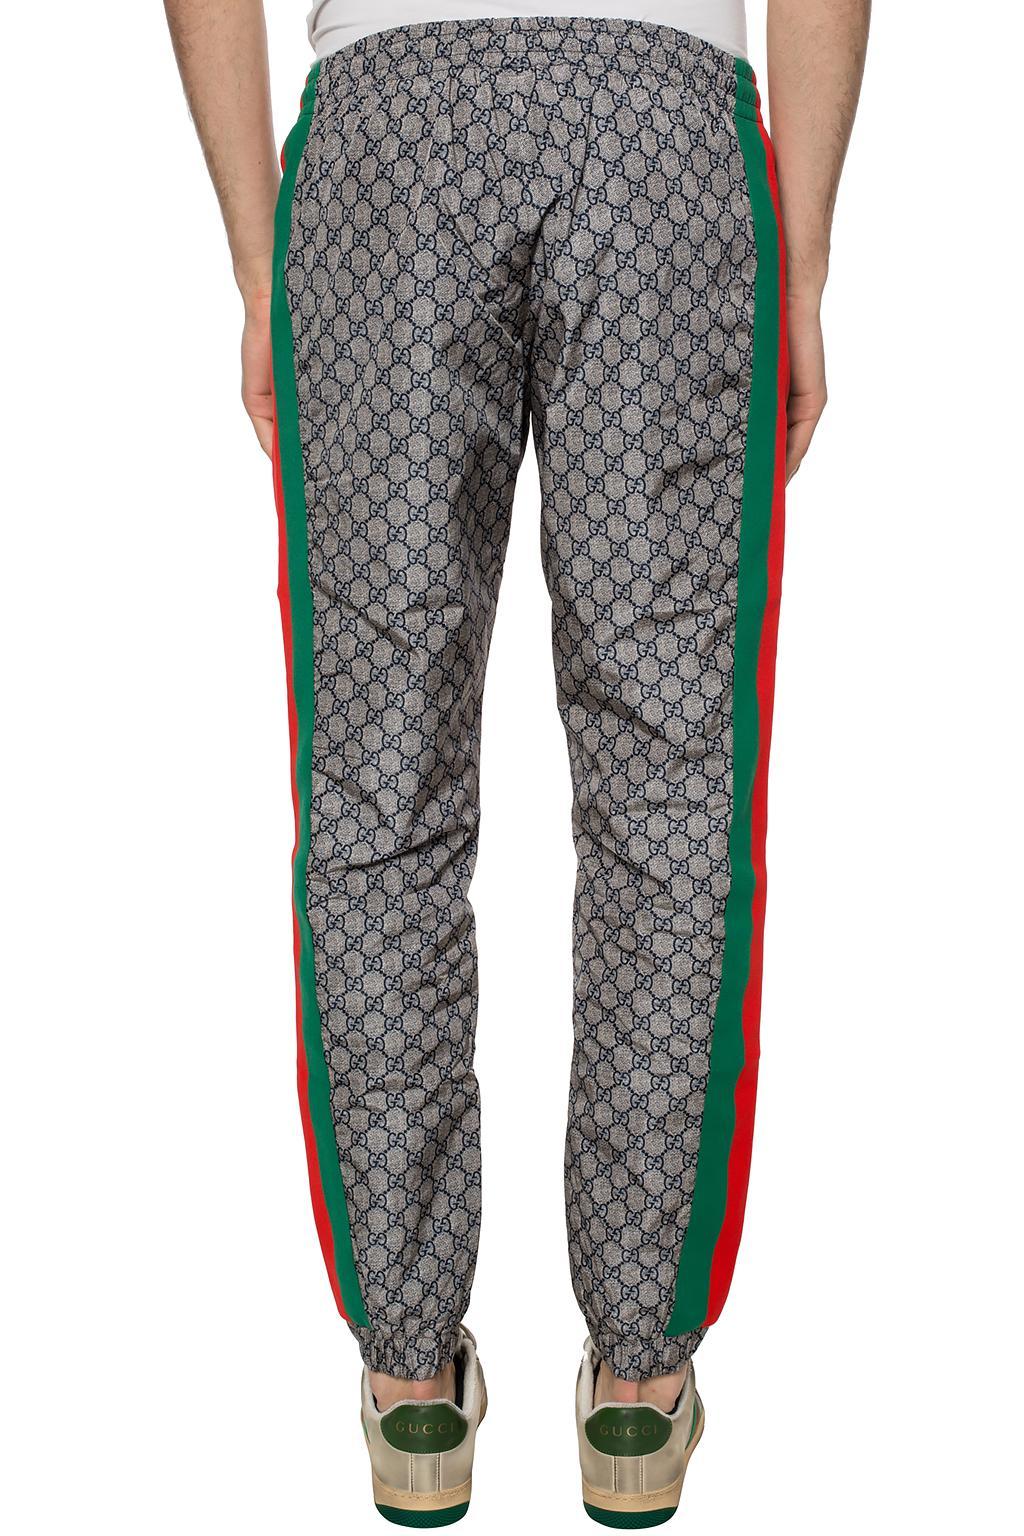 Gucci Synthetic 'web' jogging Pants in Brown for Men - Lyst